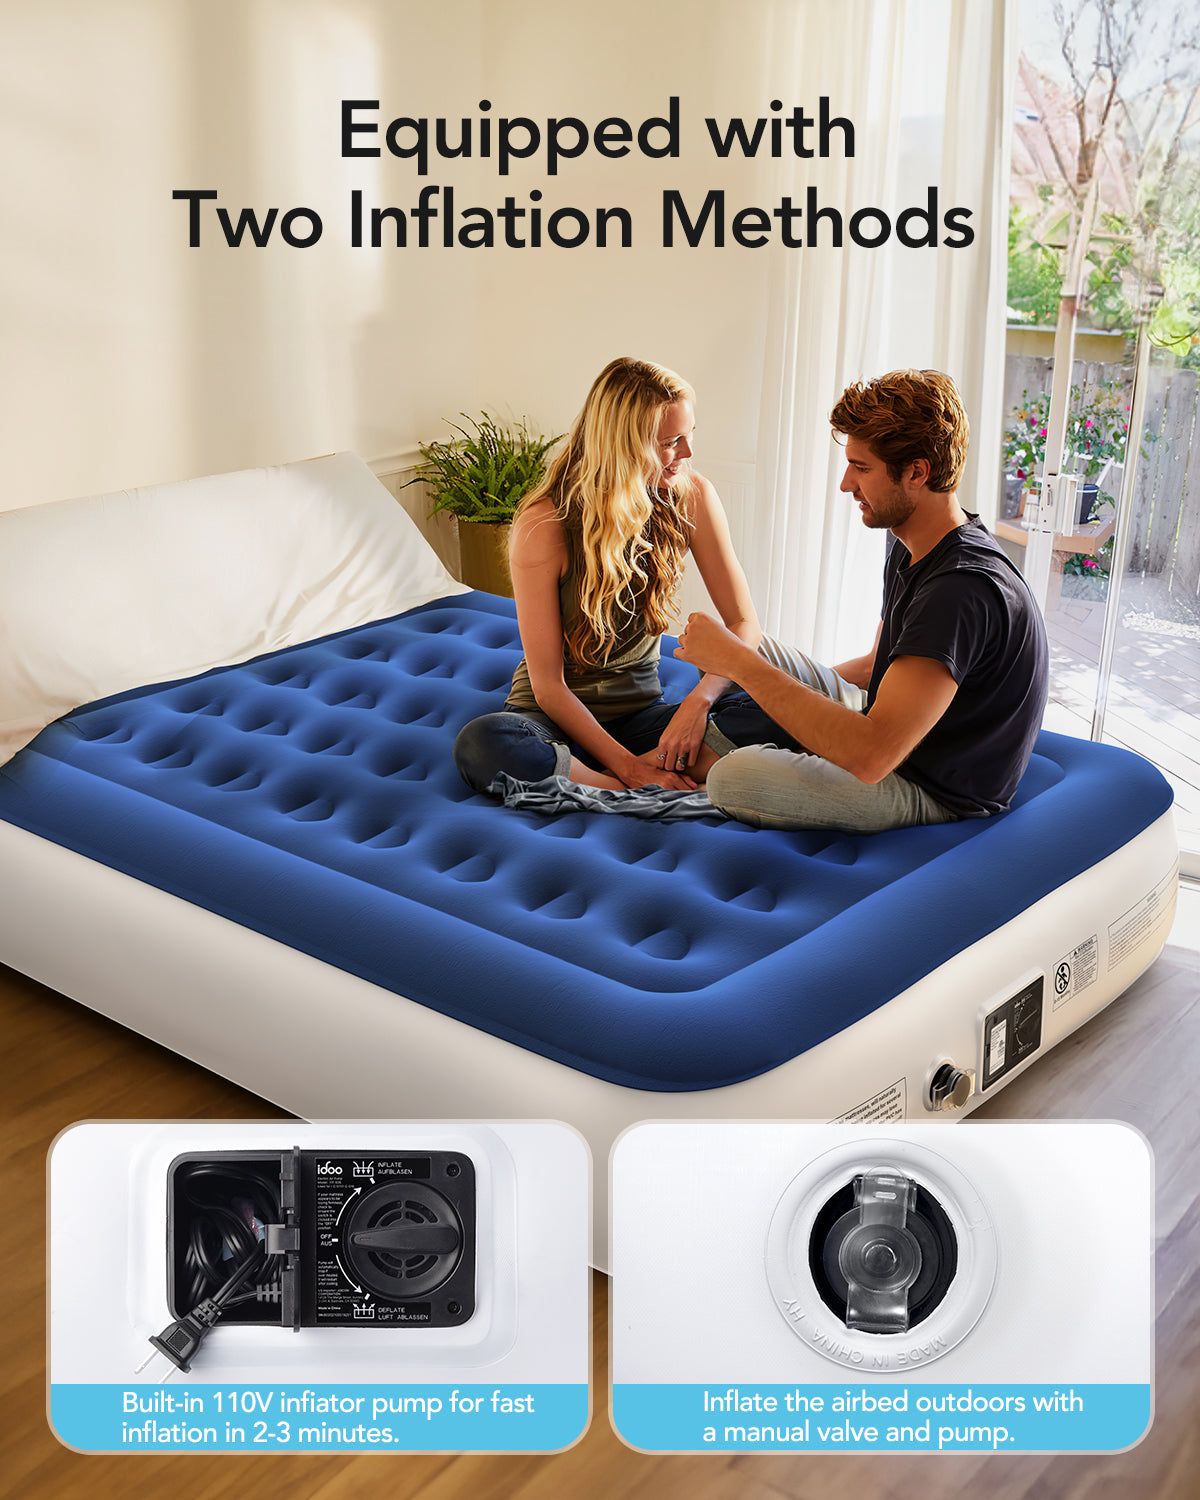 iDOO Queen Size Air Mattress, Inflatable Airbed with Built-in Pump - Air Bed by iDOO